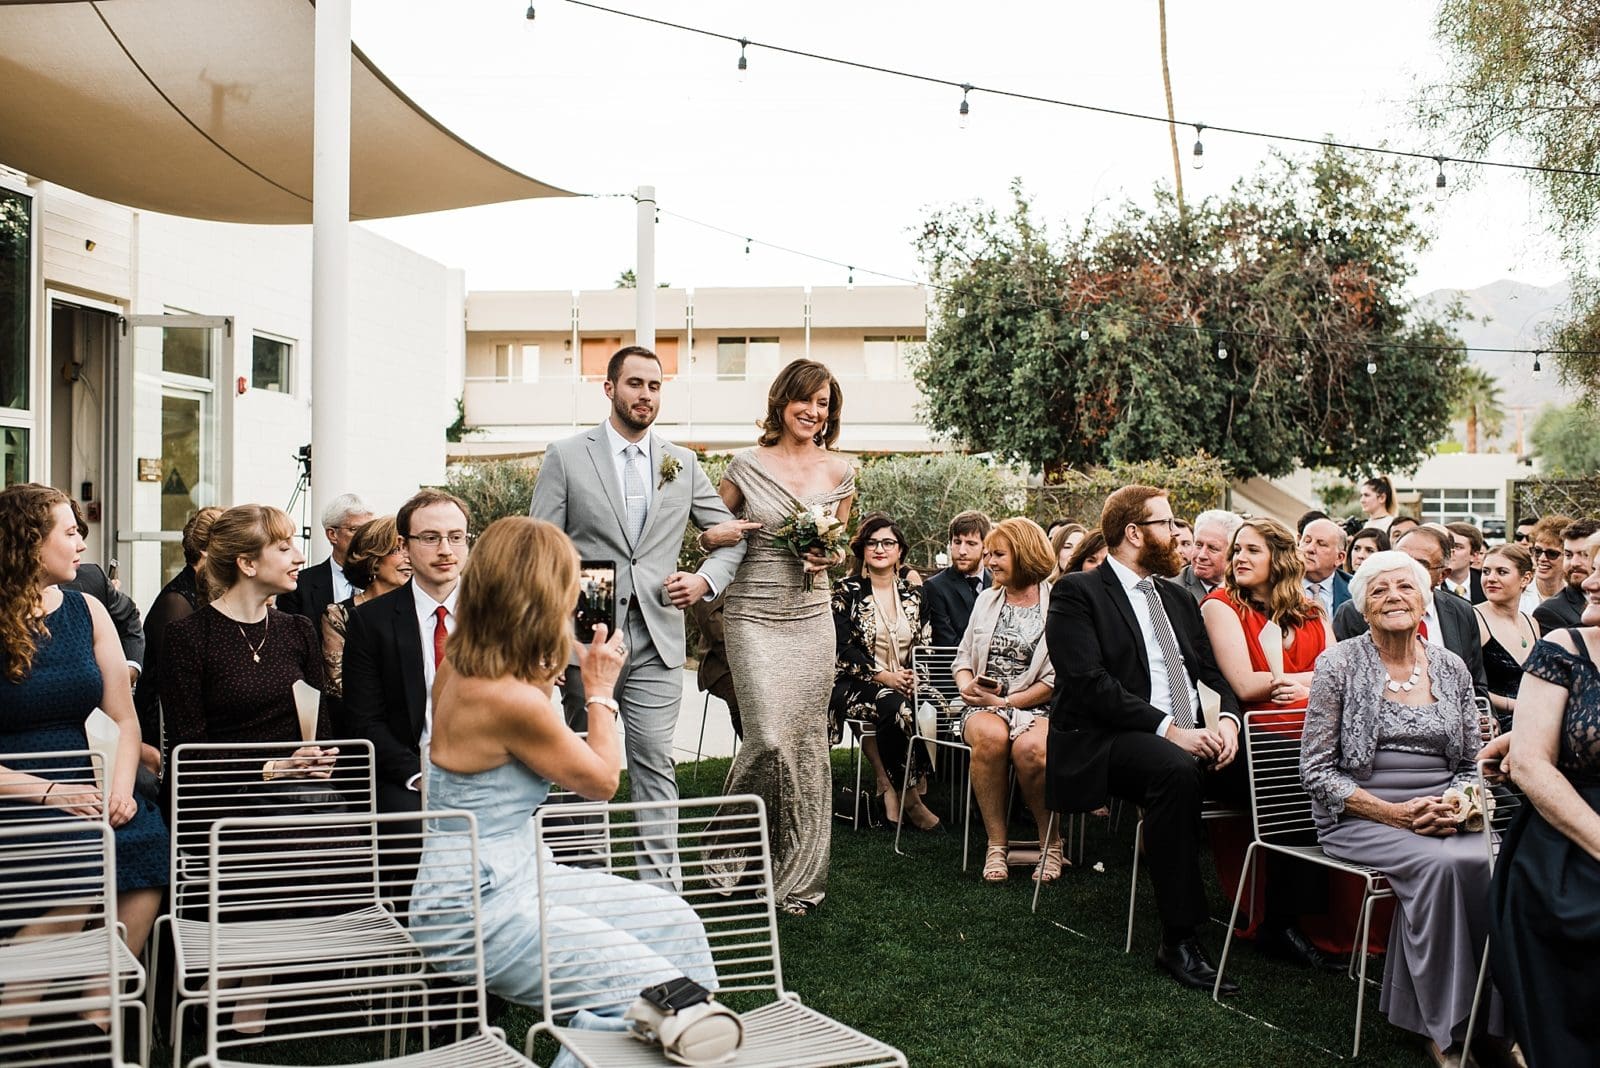 wedding ceremony at the ace hotel in palm springs